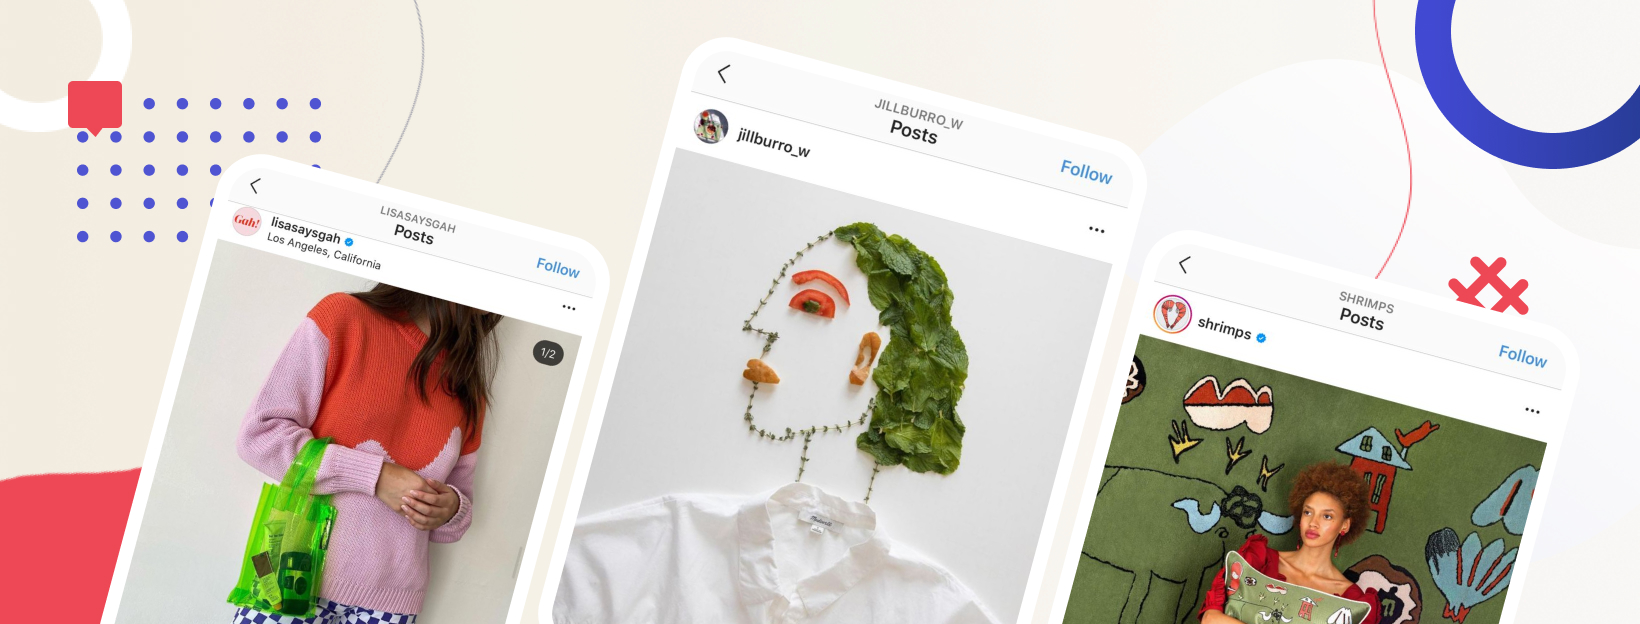 3 Instagram shops best practices: hacks for clothing brands to stand out (content, promotion & photography insights)